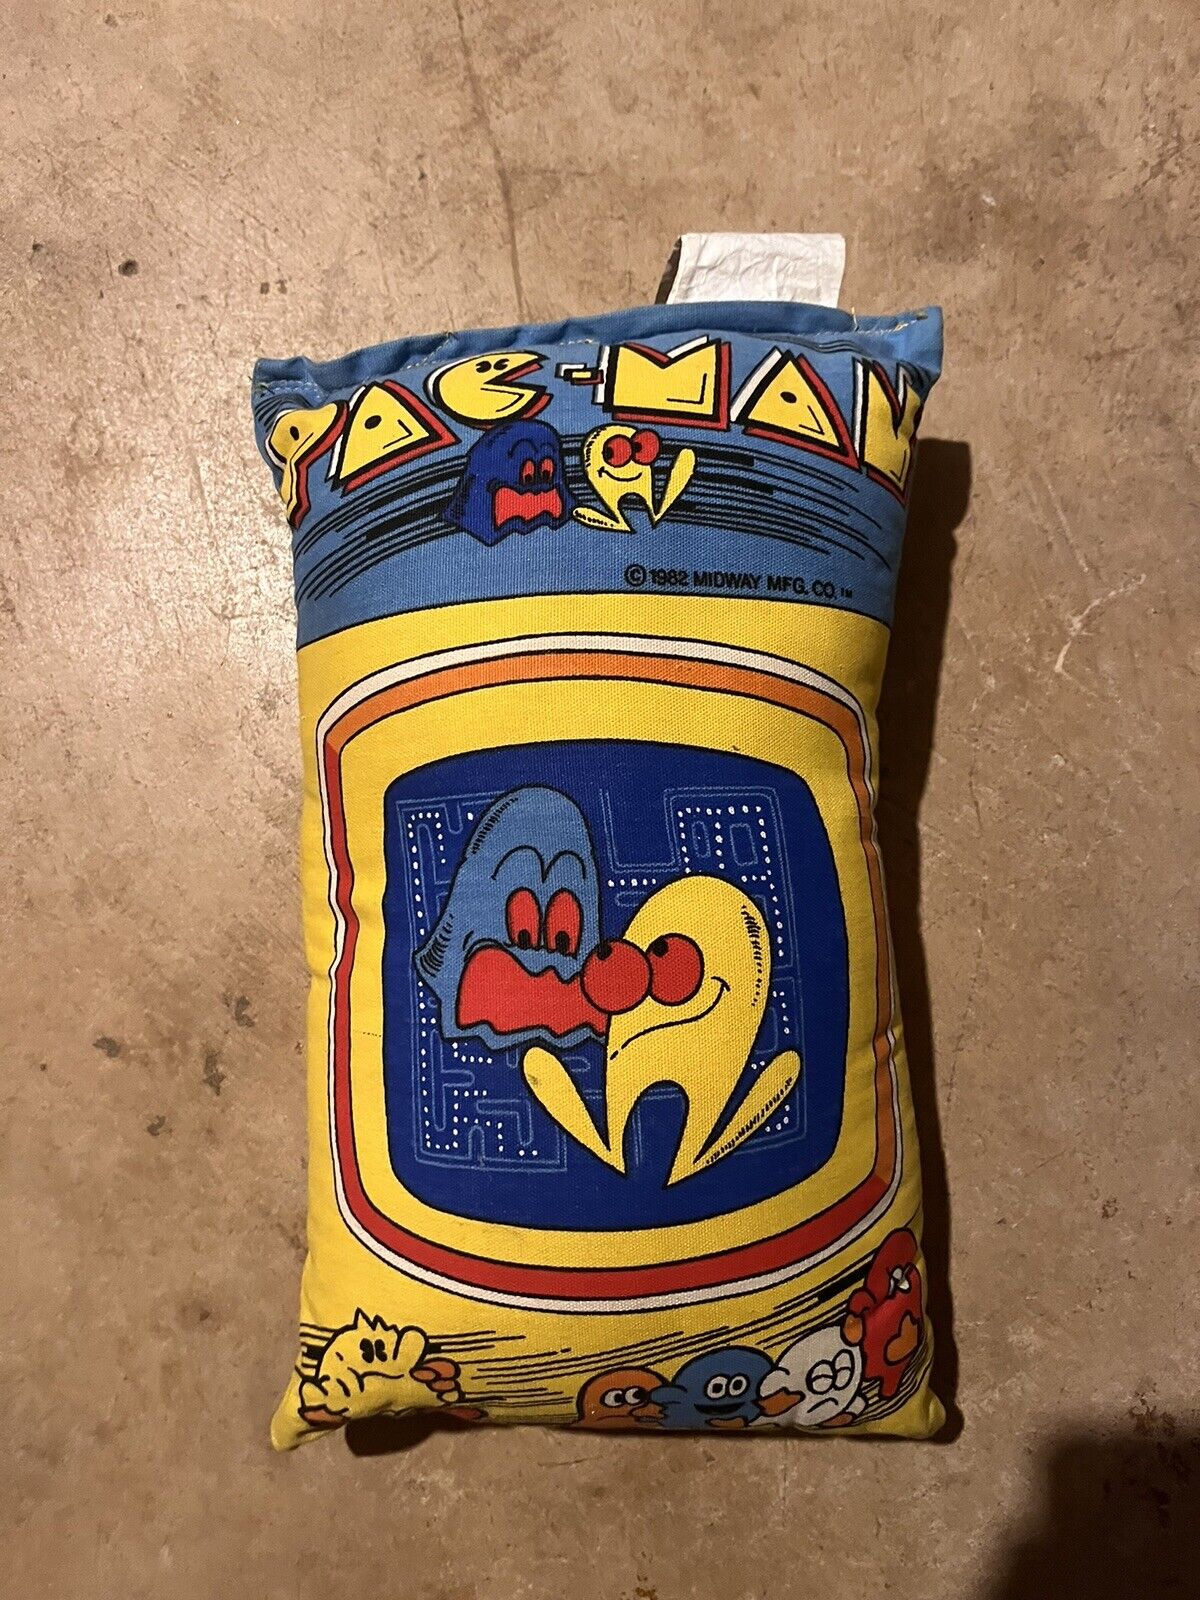 Vintage 1982 Midway MFG Pac Man Graphic Pillow